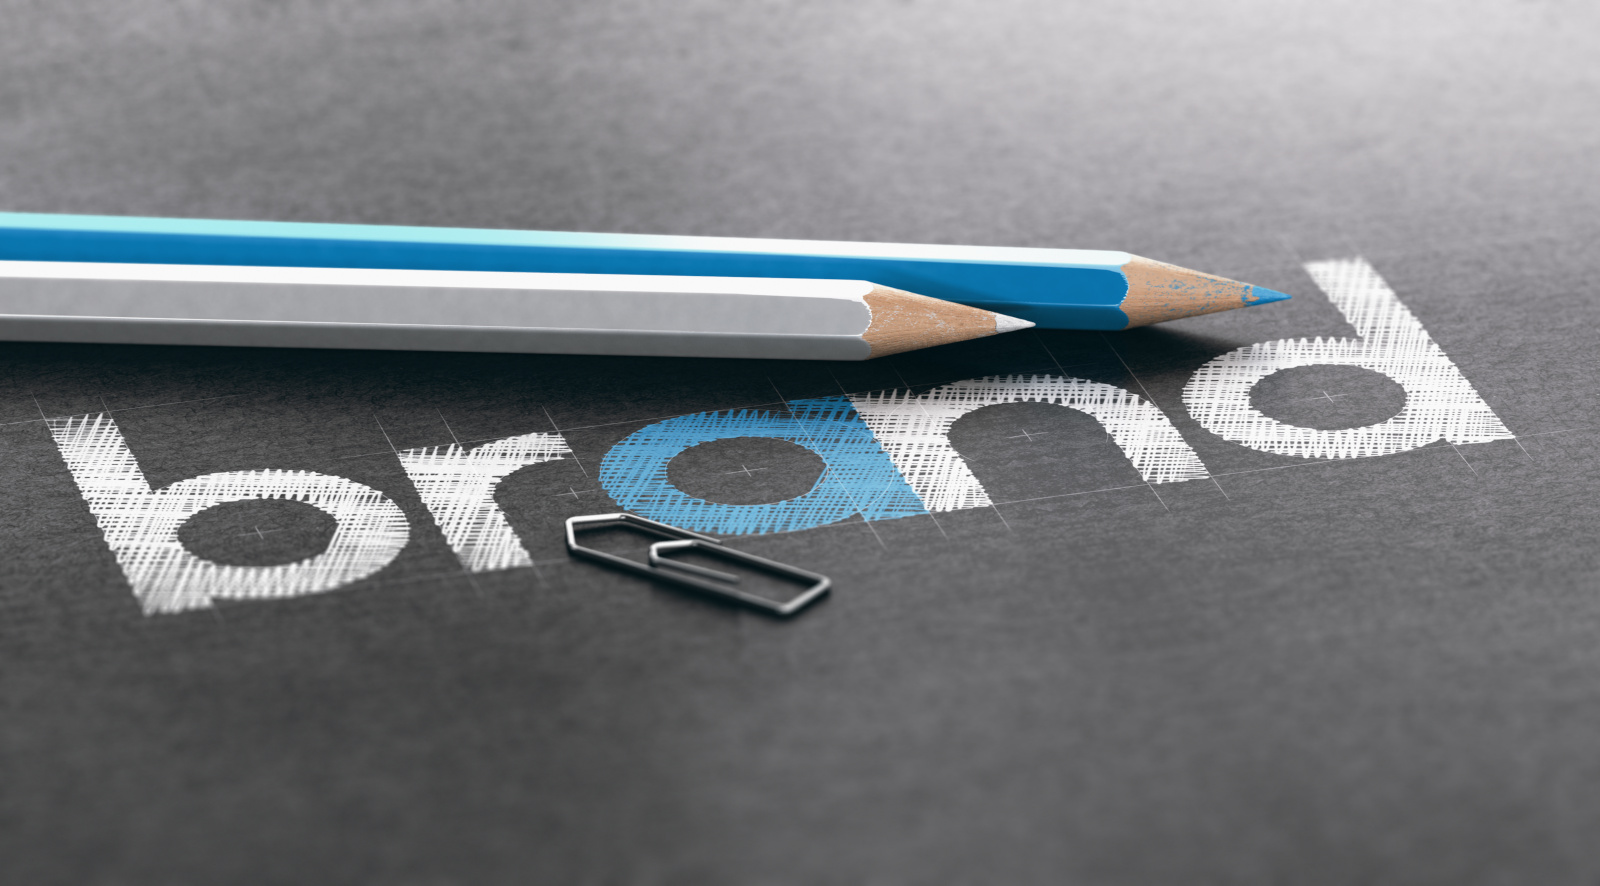 Branding concept image in blue and white pencil